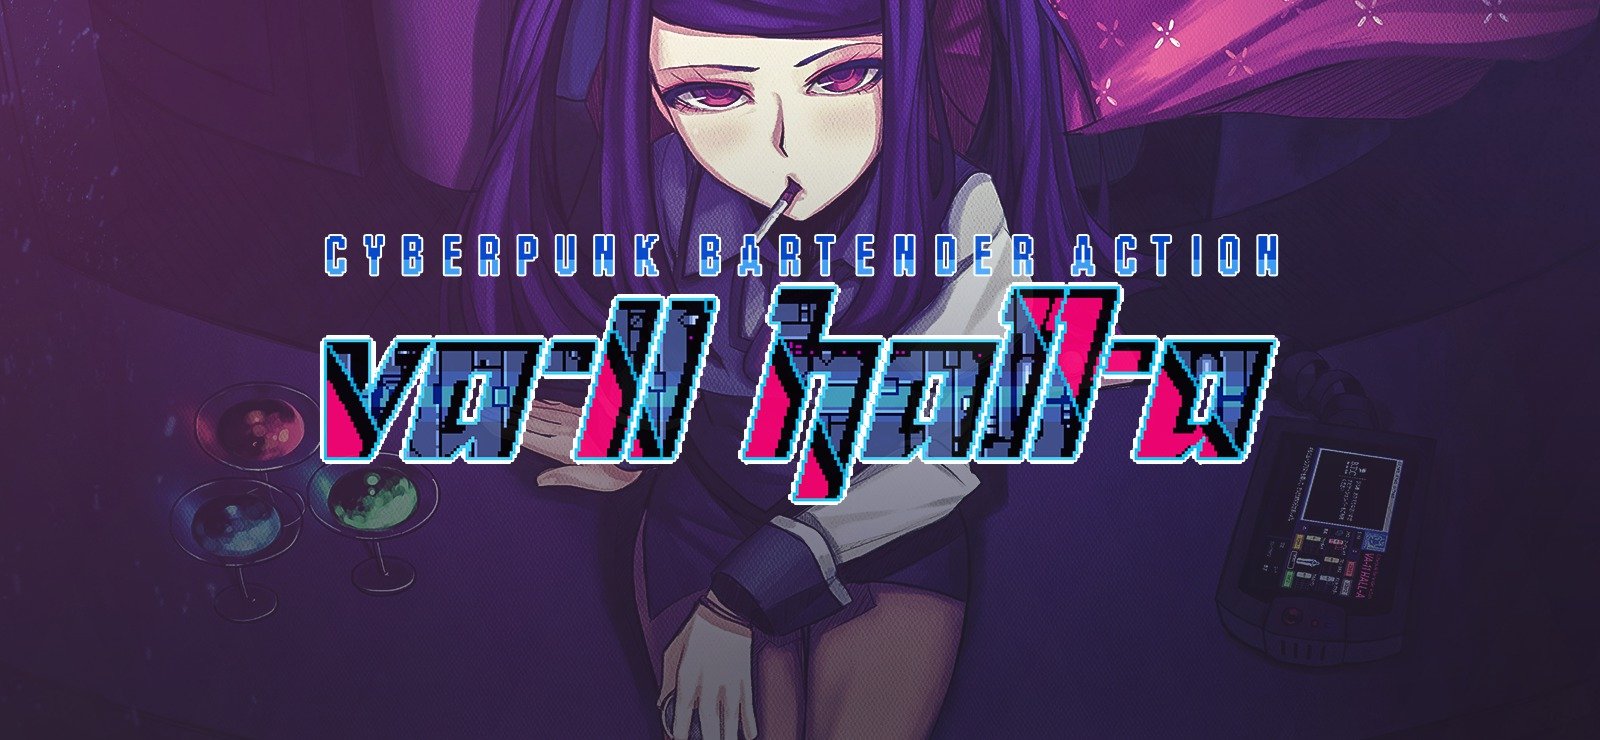 VA-11 HALL-A Vita Port Out Today, Learn More